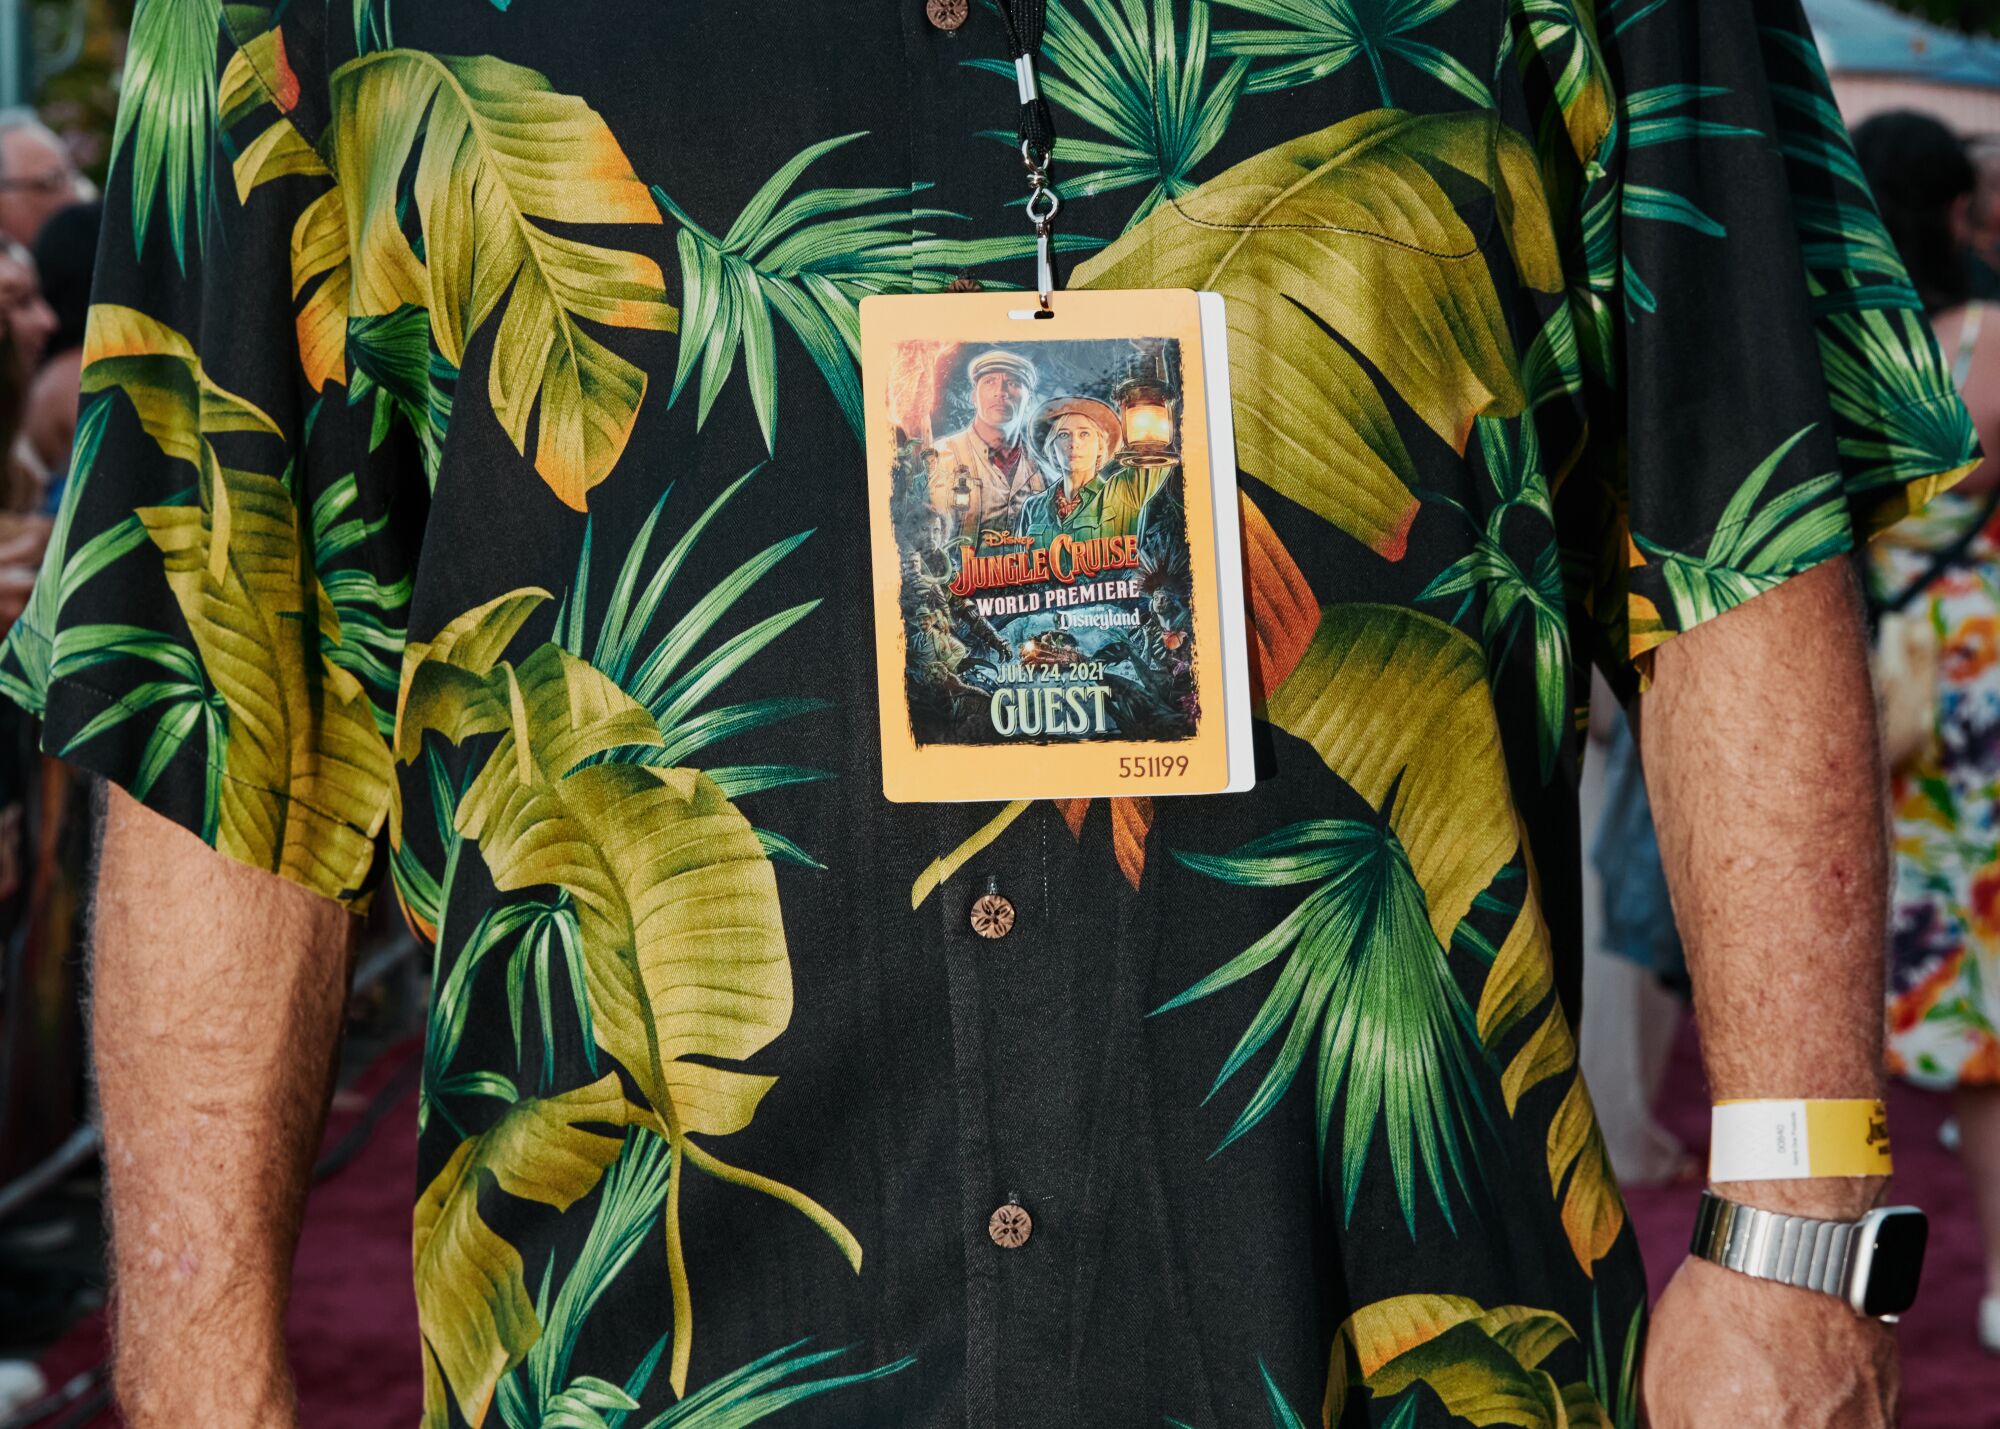 A man wears a jungle print shirt and guest badge on the red carpet.